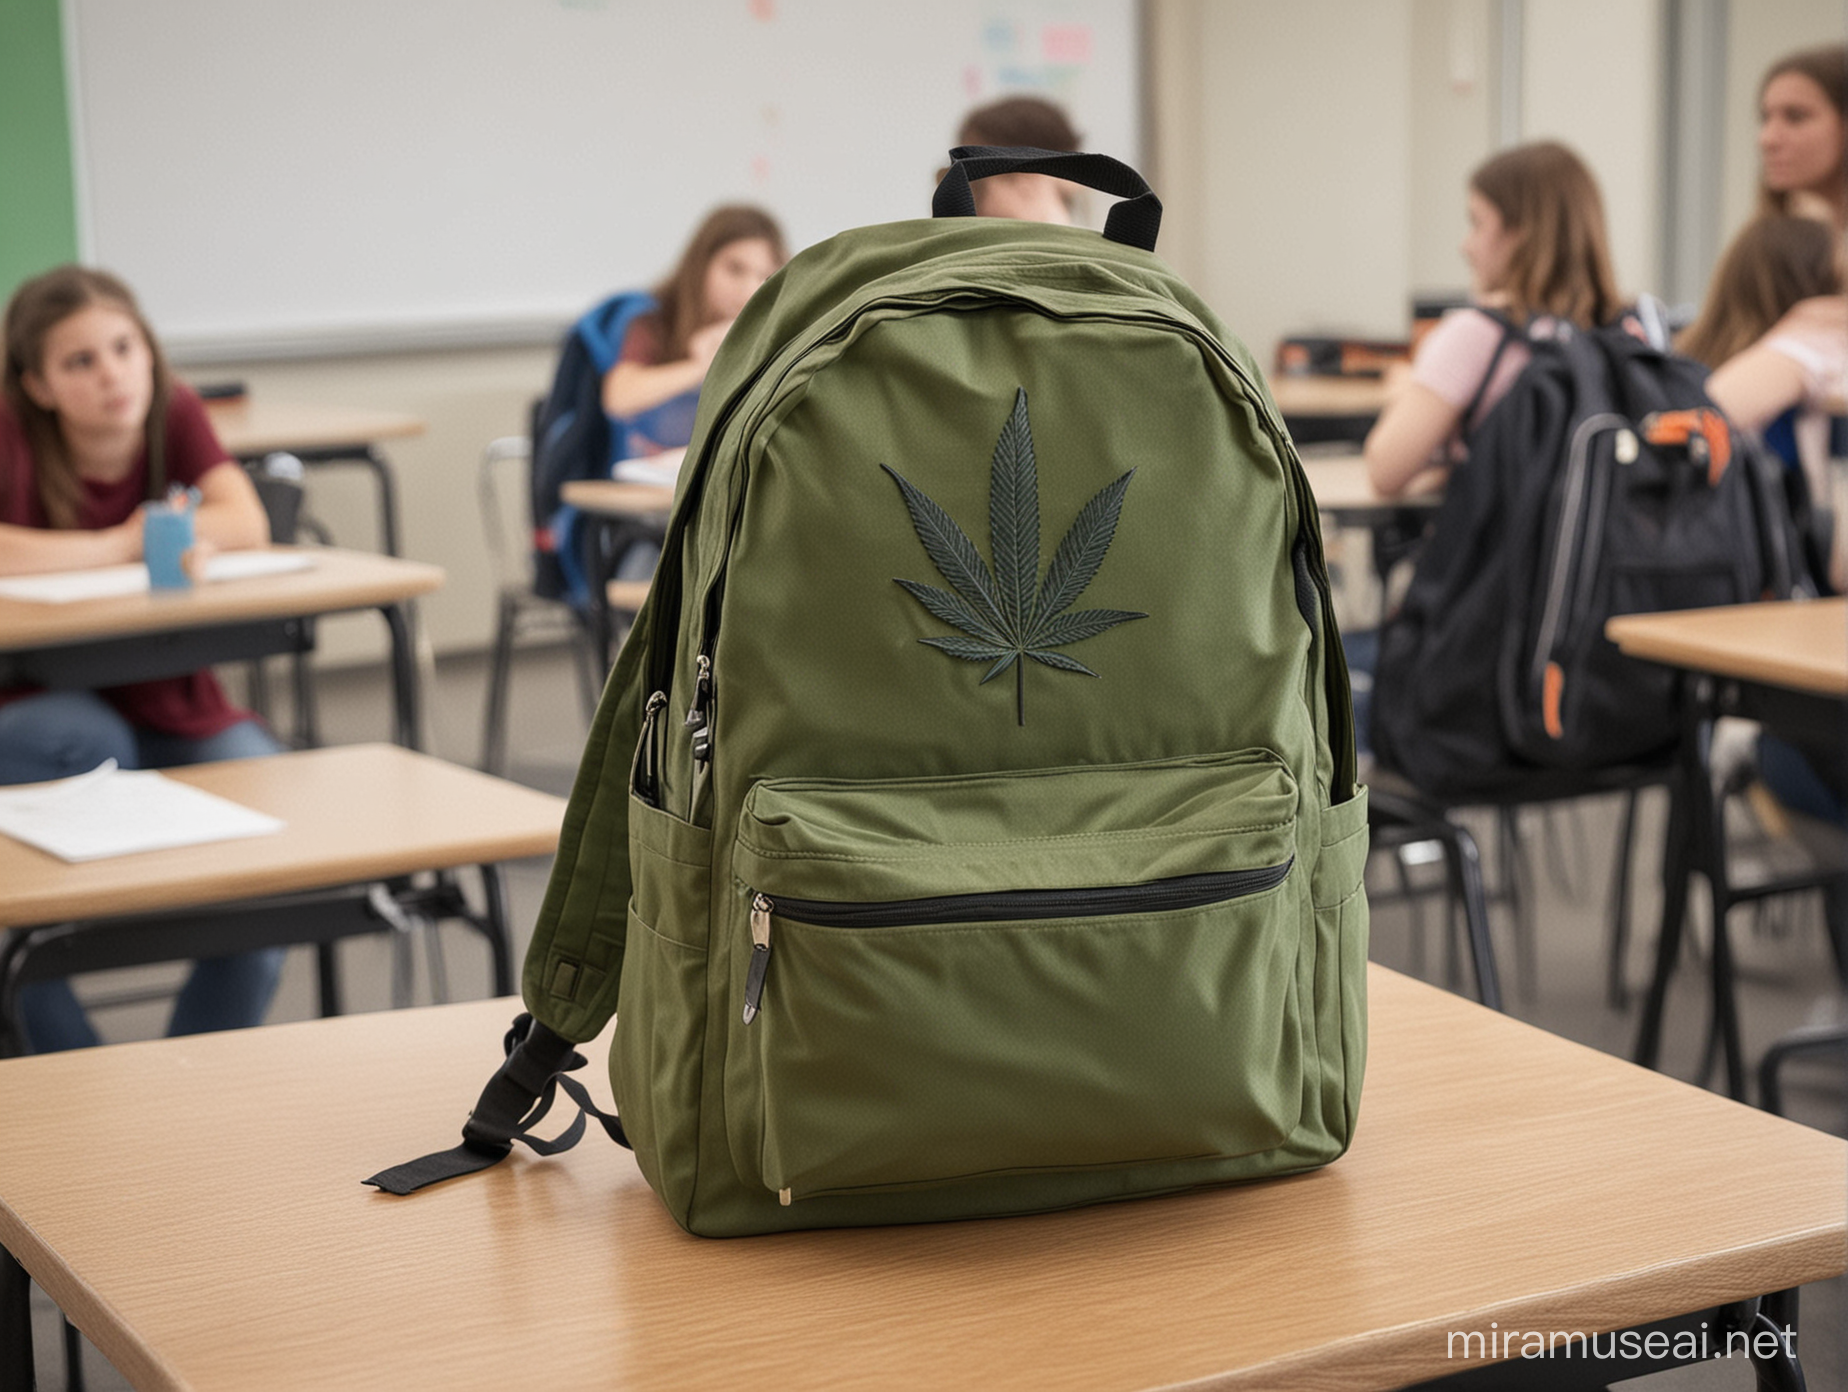  backpack with marijuana inside in the classroom full of students
